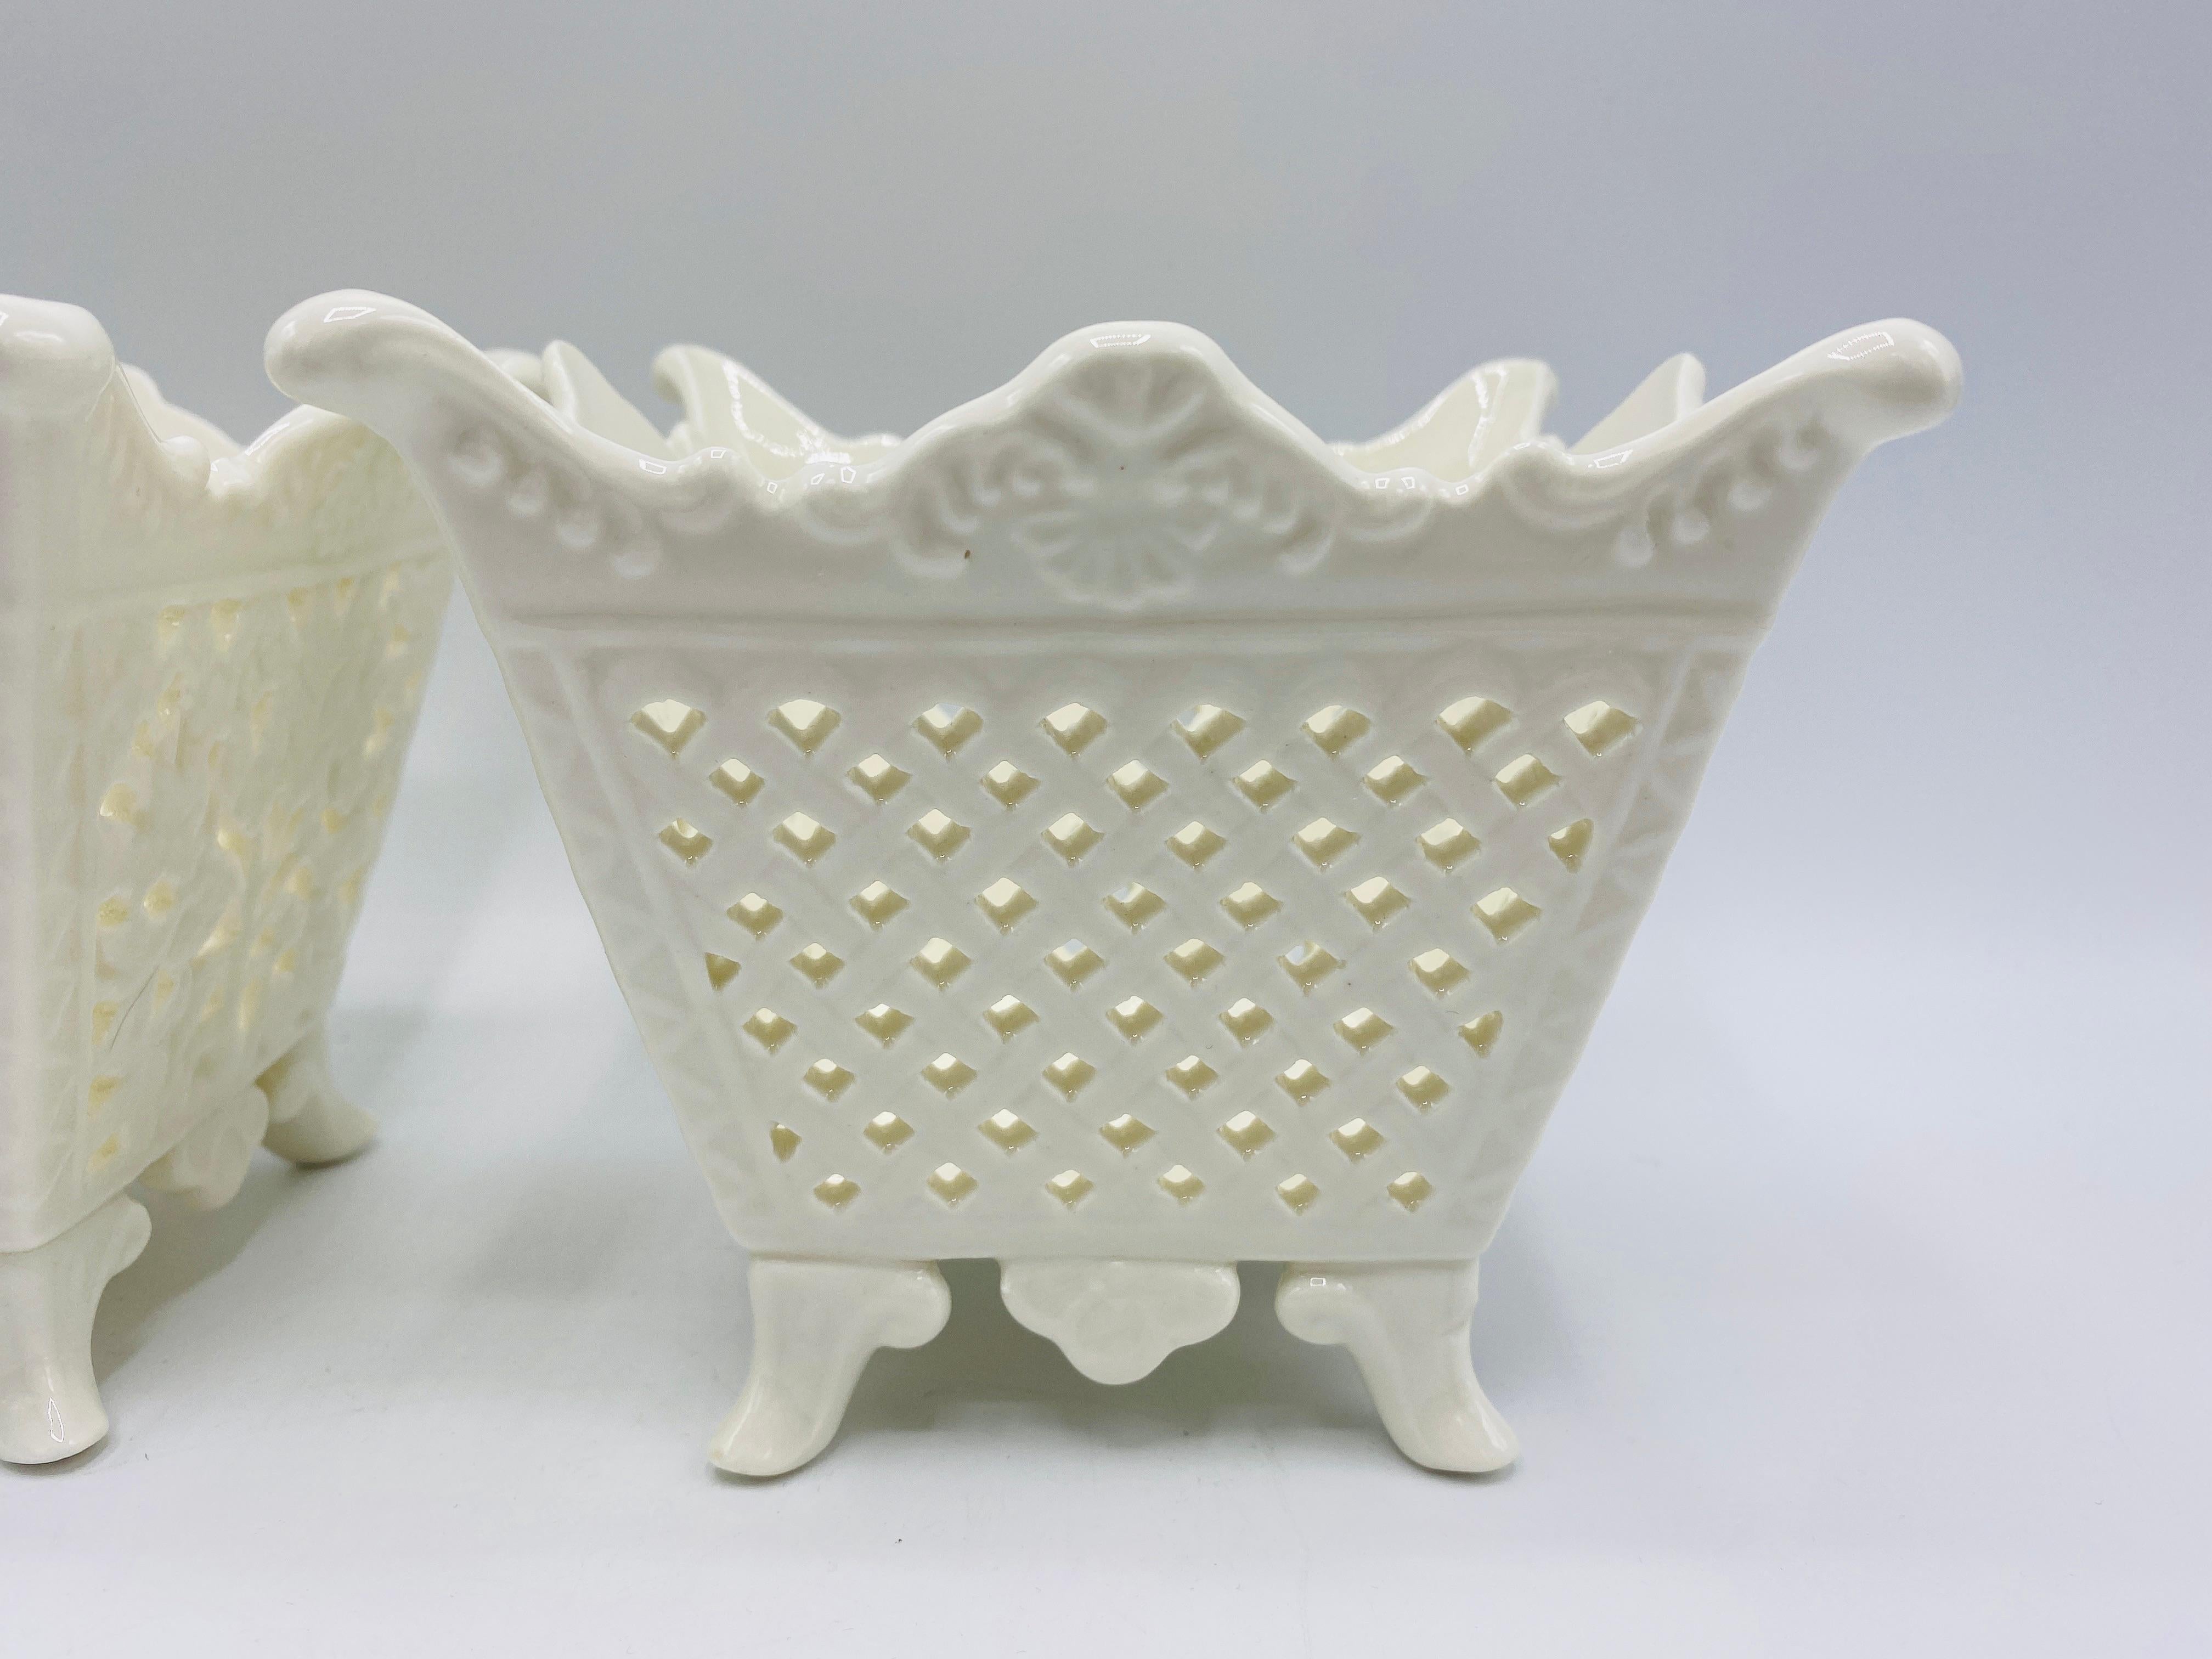 1960s Italian Pierced Porcelain Cachepots, Pair In Good Condition For Sale In Richmond, VA